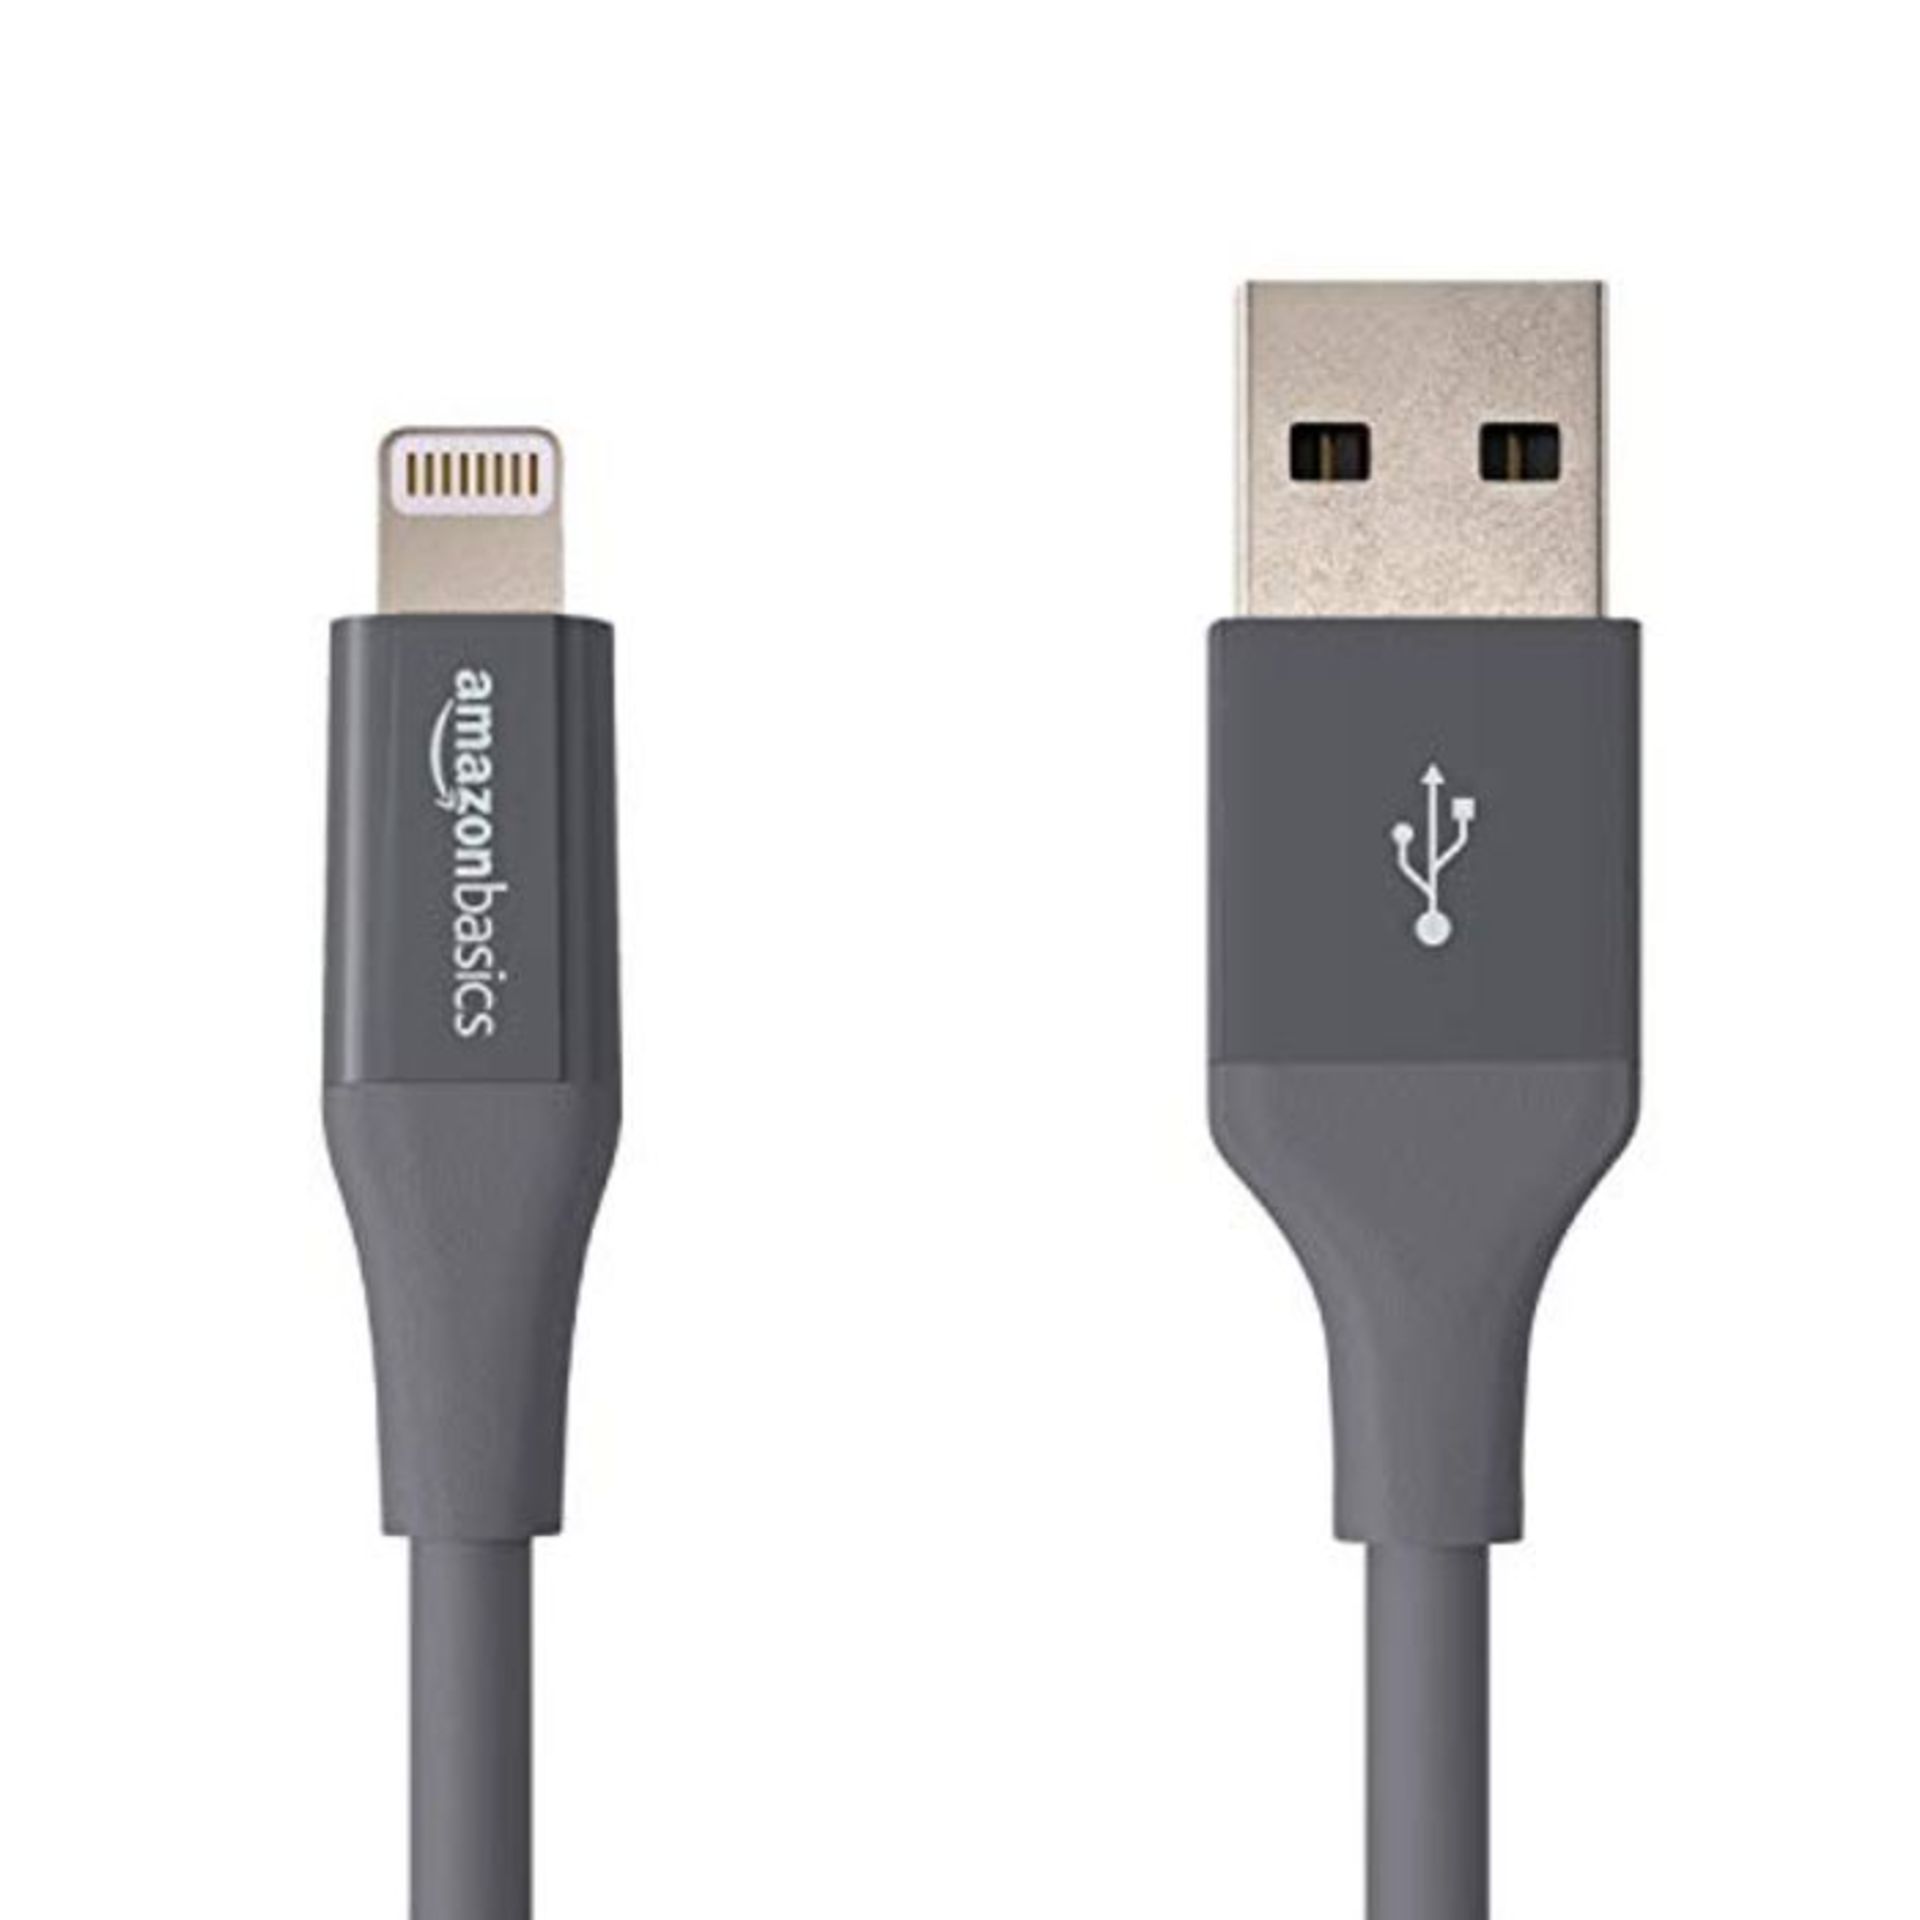 Amazon Basics USB A Cable with Lightning Connector, Advanced Collection - 4 Inches (10